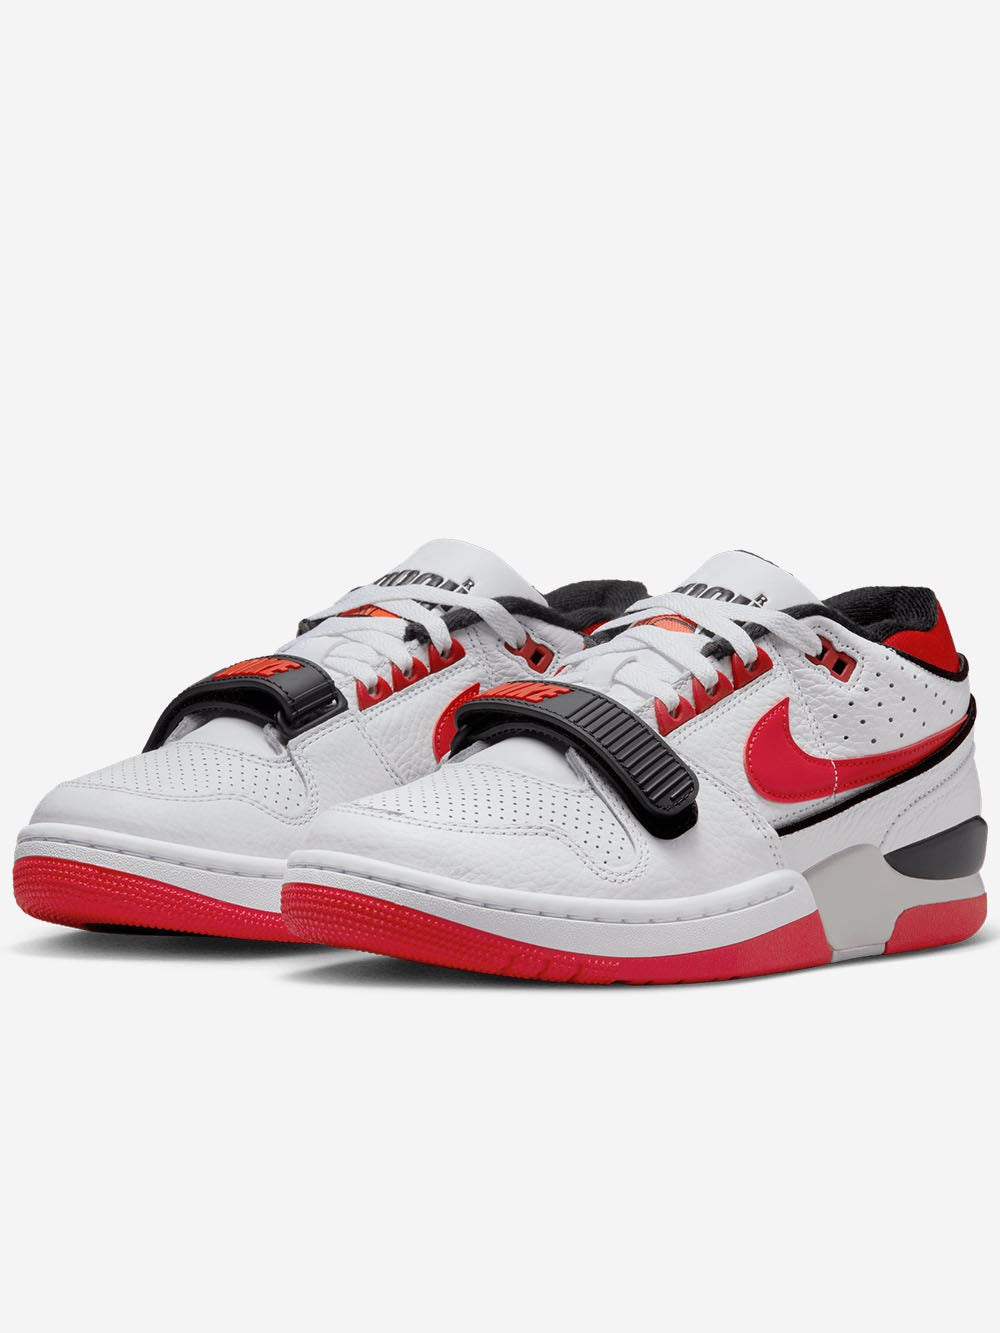 NIKE Air Alpha Force 88 "Chicago" Sneakers Rosso Urbanstaroma